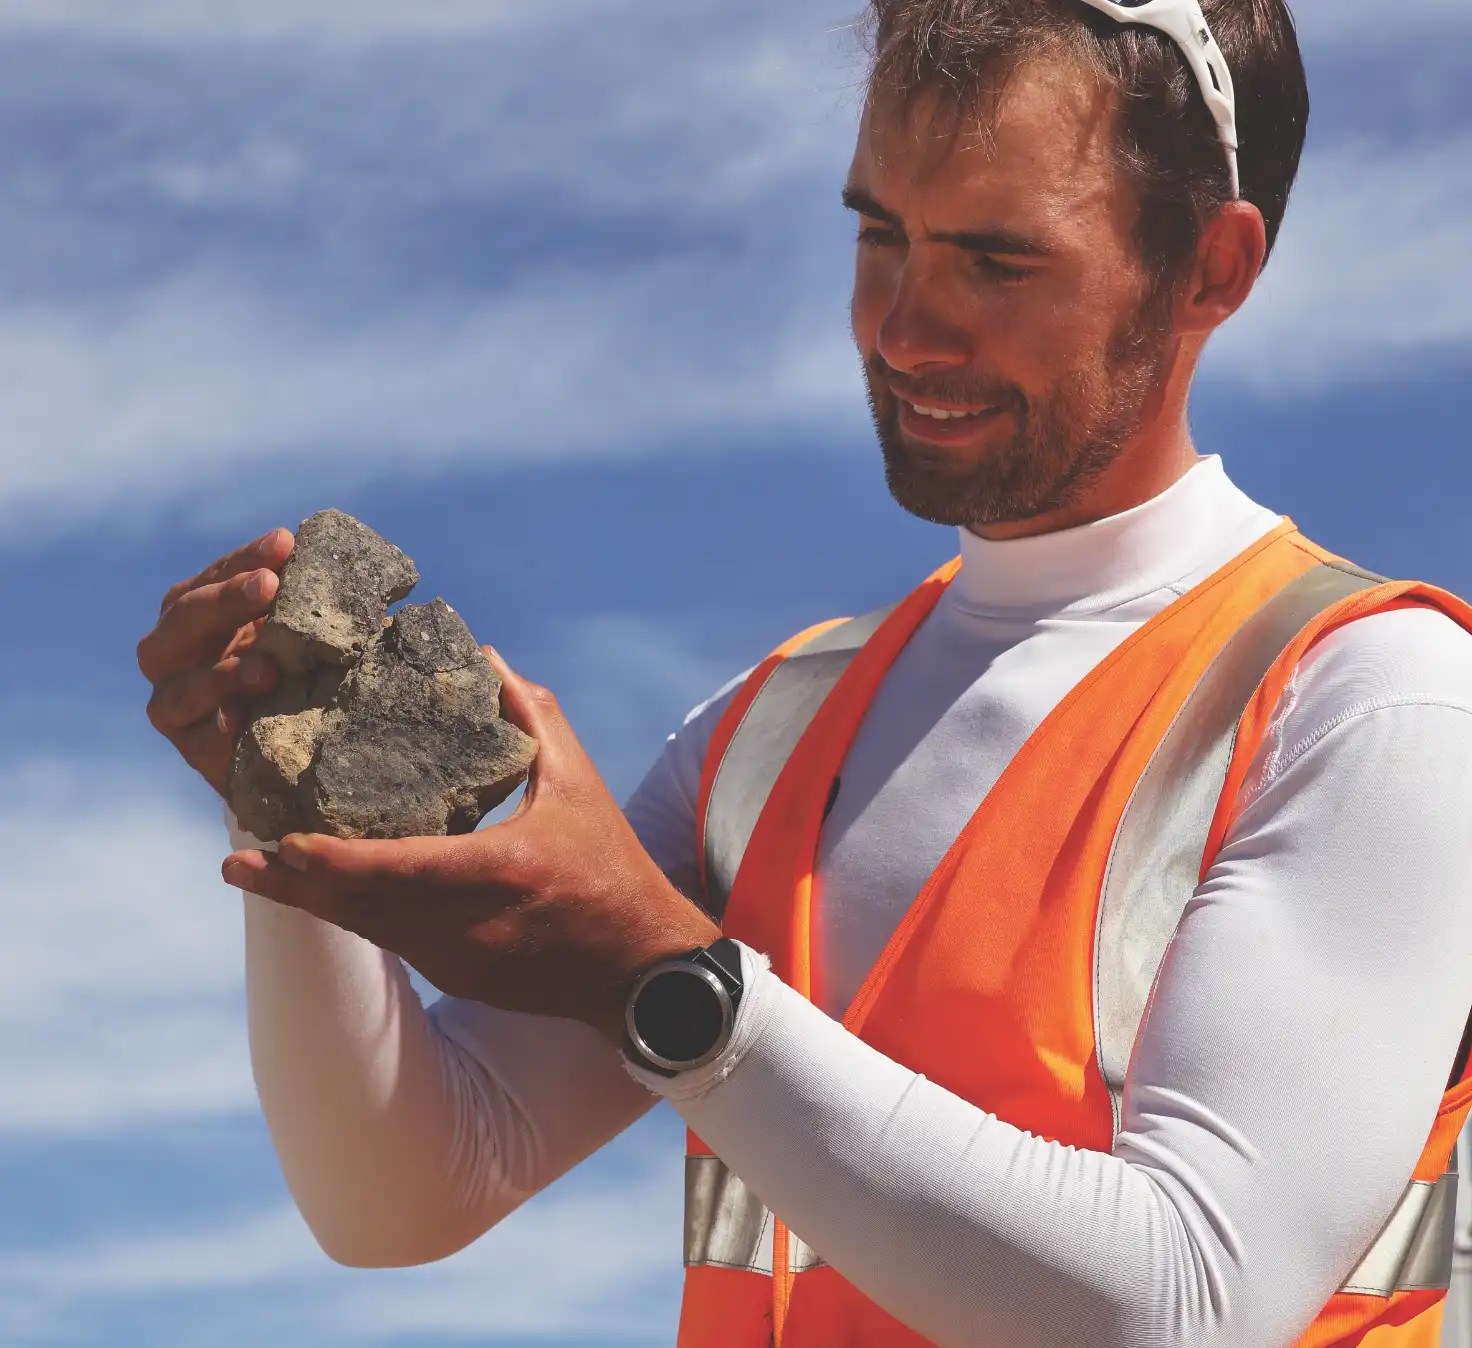 Archaeologist in the field studying a rock